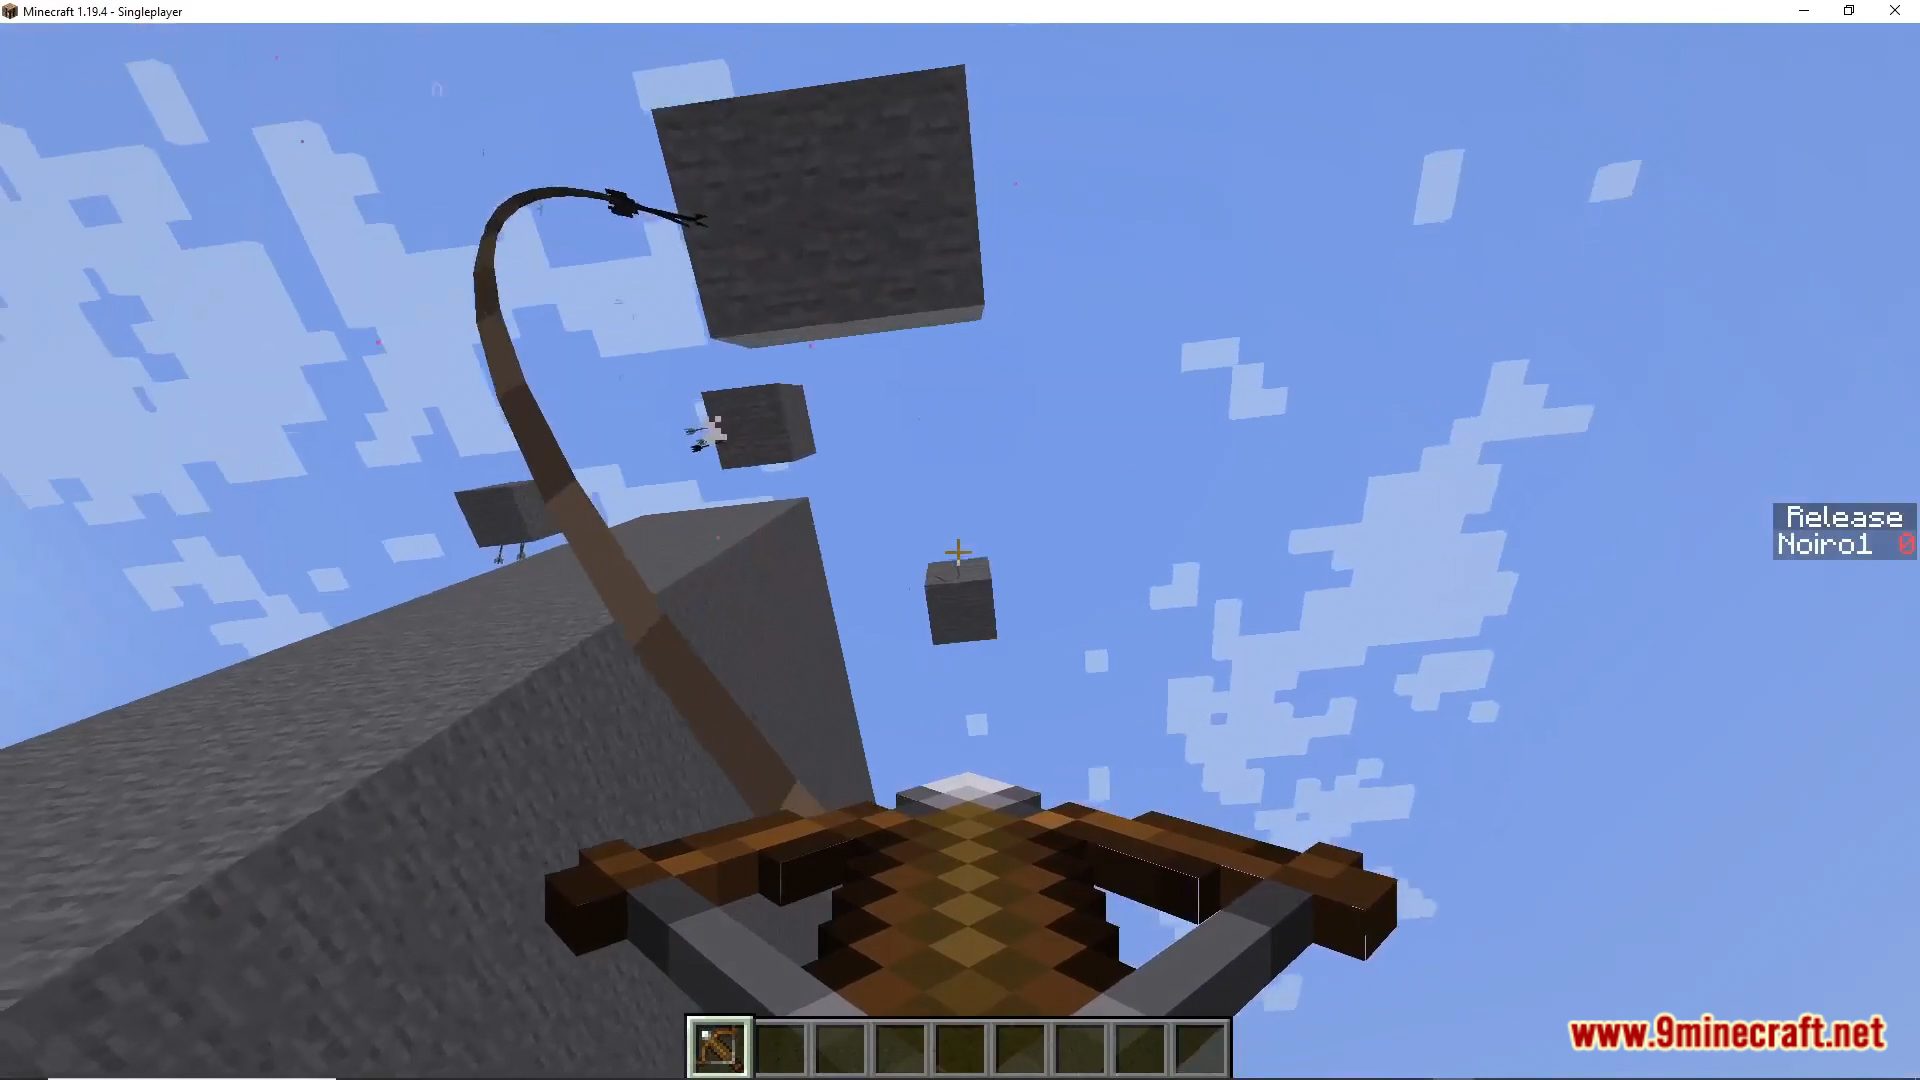 Grappling Hook Data Pack (1.19.4, 1.19.2) - Travels Faster! 6